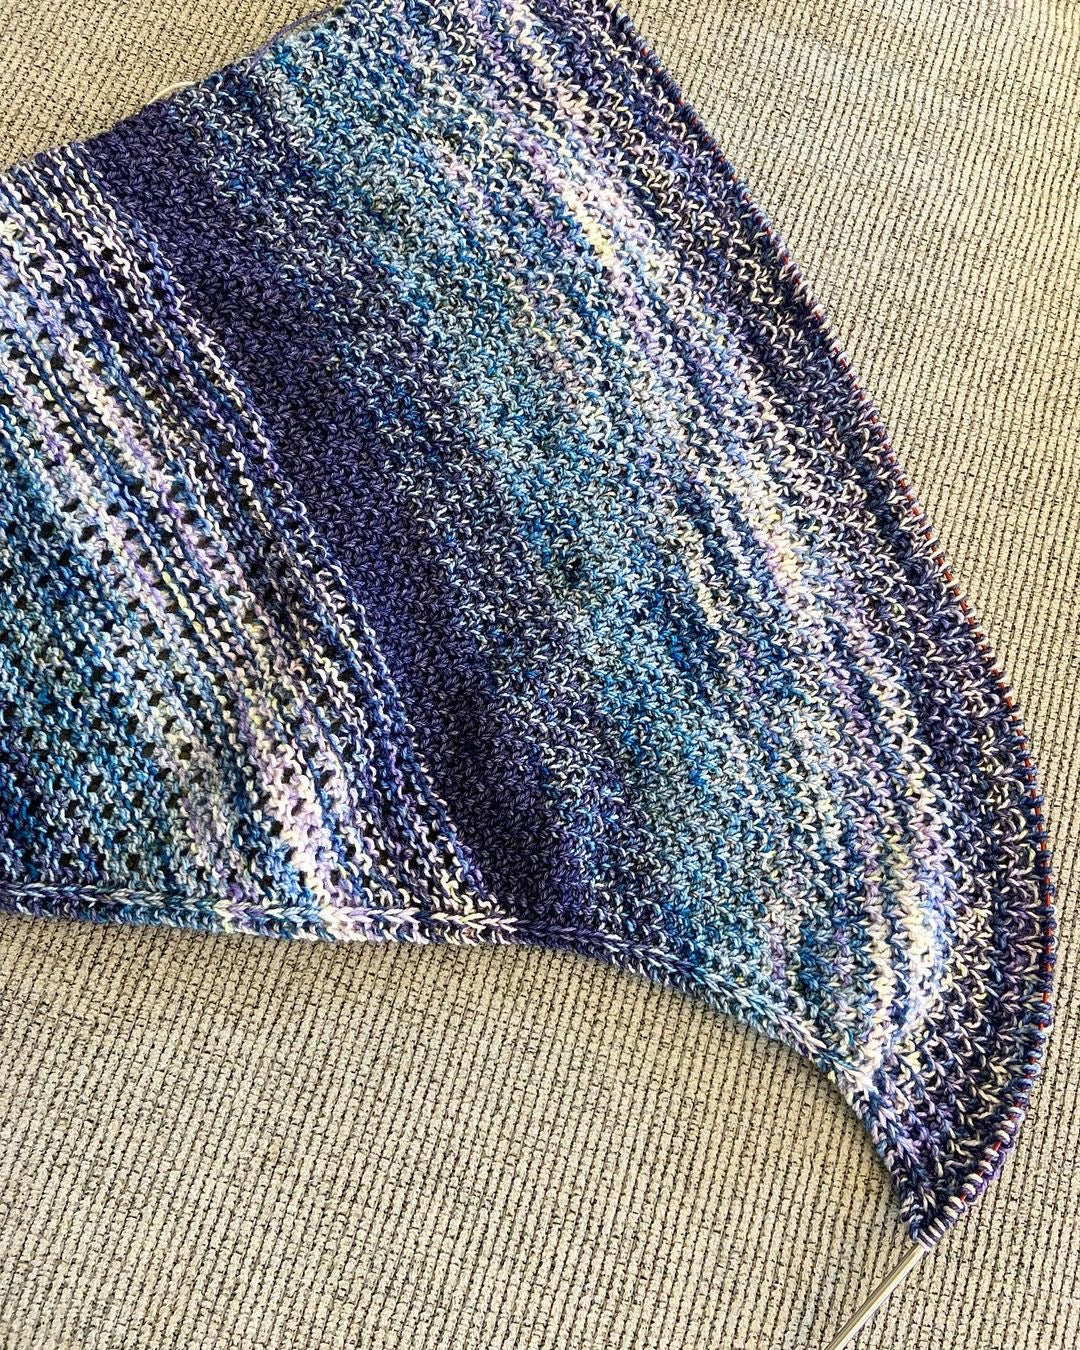 A textured and eyelet shawl with fringe in blue, purple, pink, yellow and white yarn faded together. 